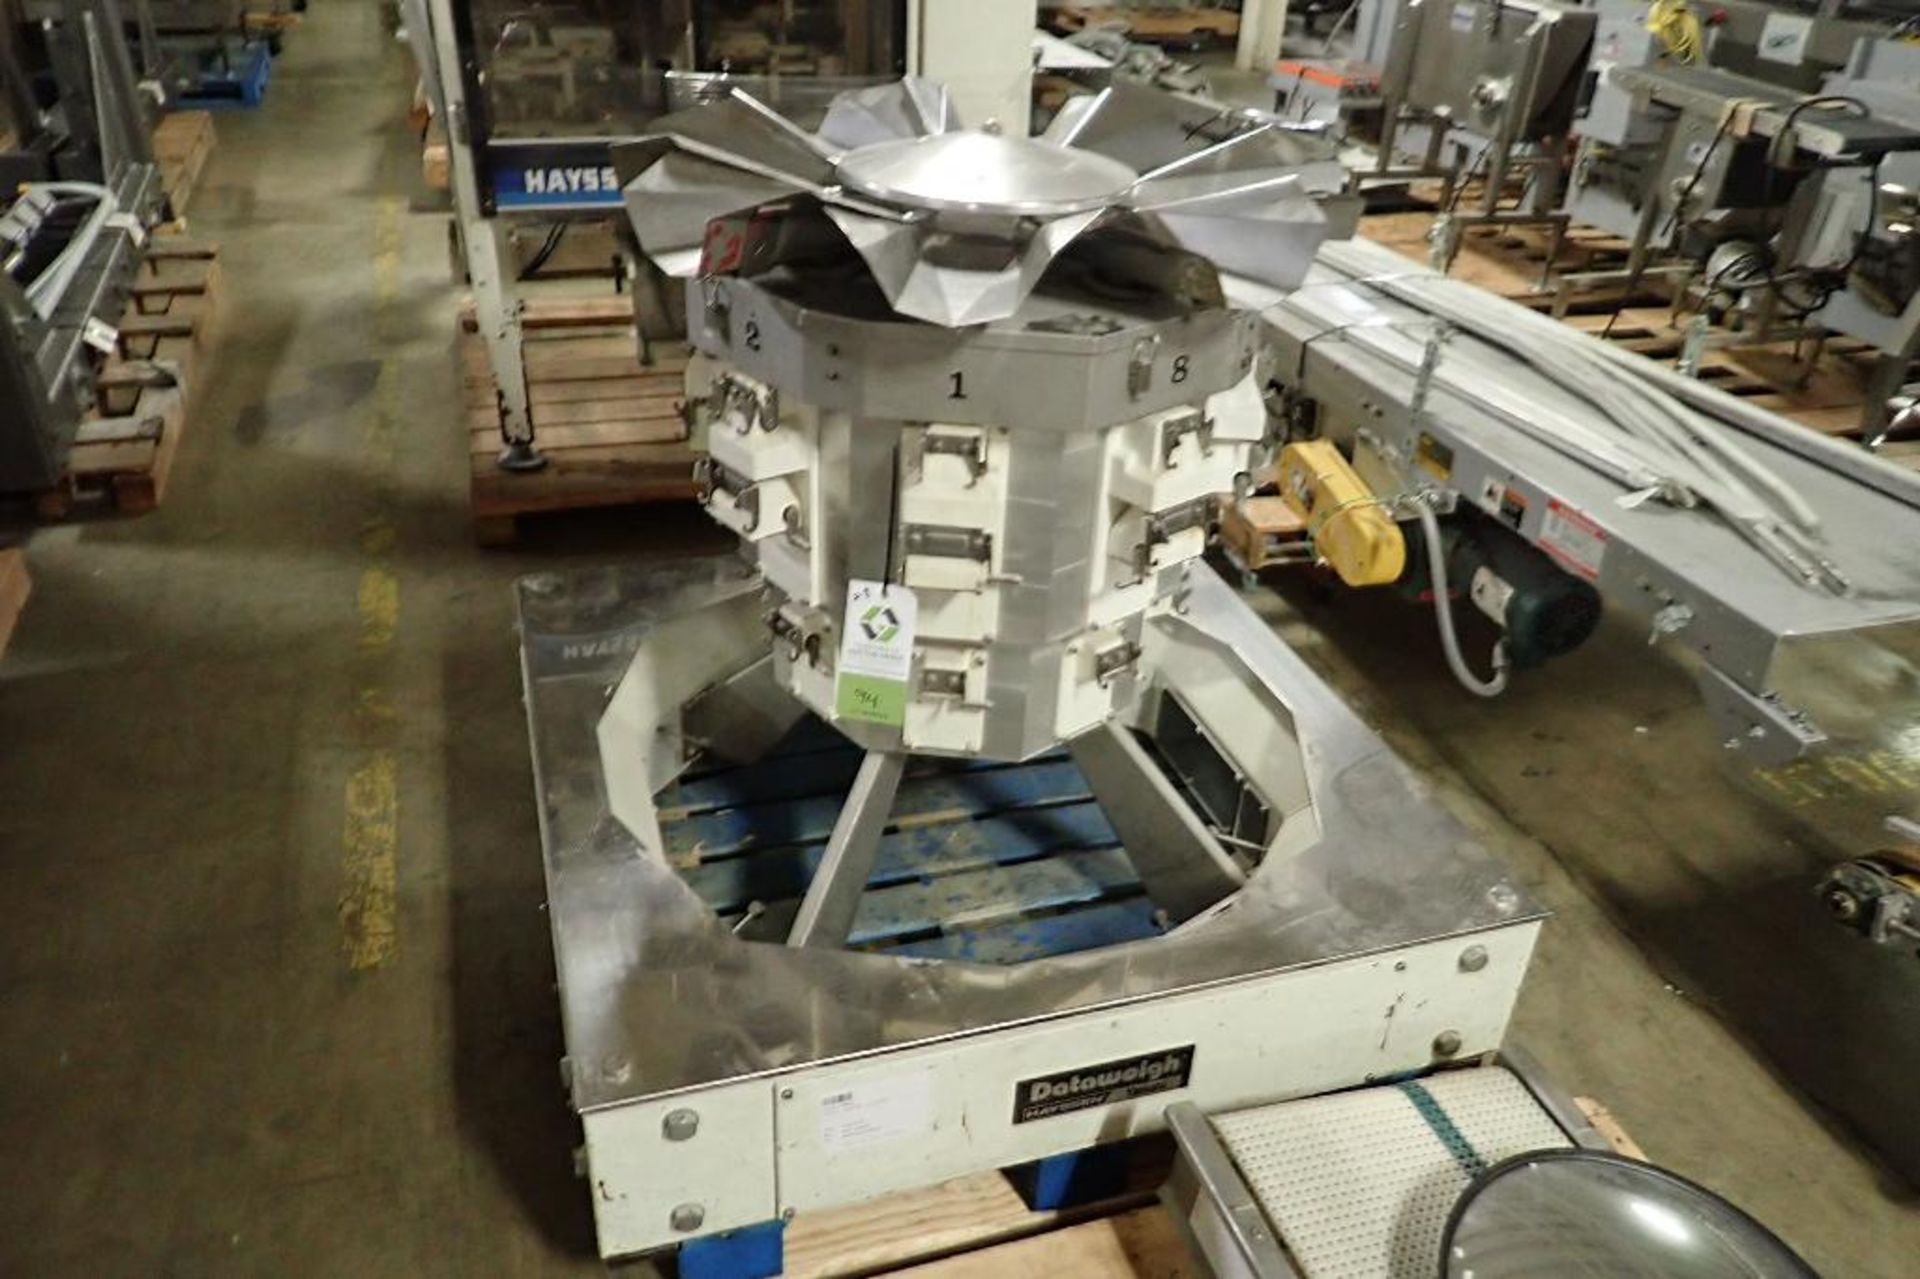 1994 Hayssen Yamato data weigh 8 head scale, Model ADW-508MD, SN 084026/930442, 8 g to 1000 g capaci - Image 8 of 34